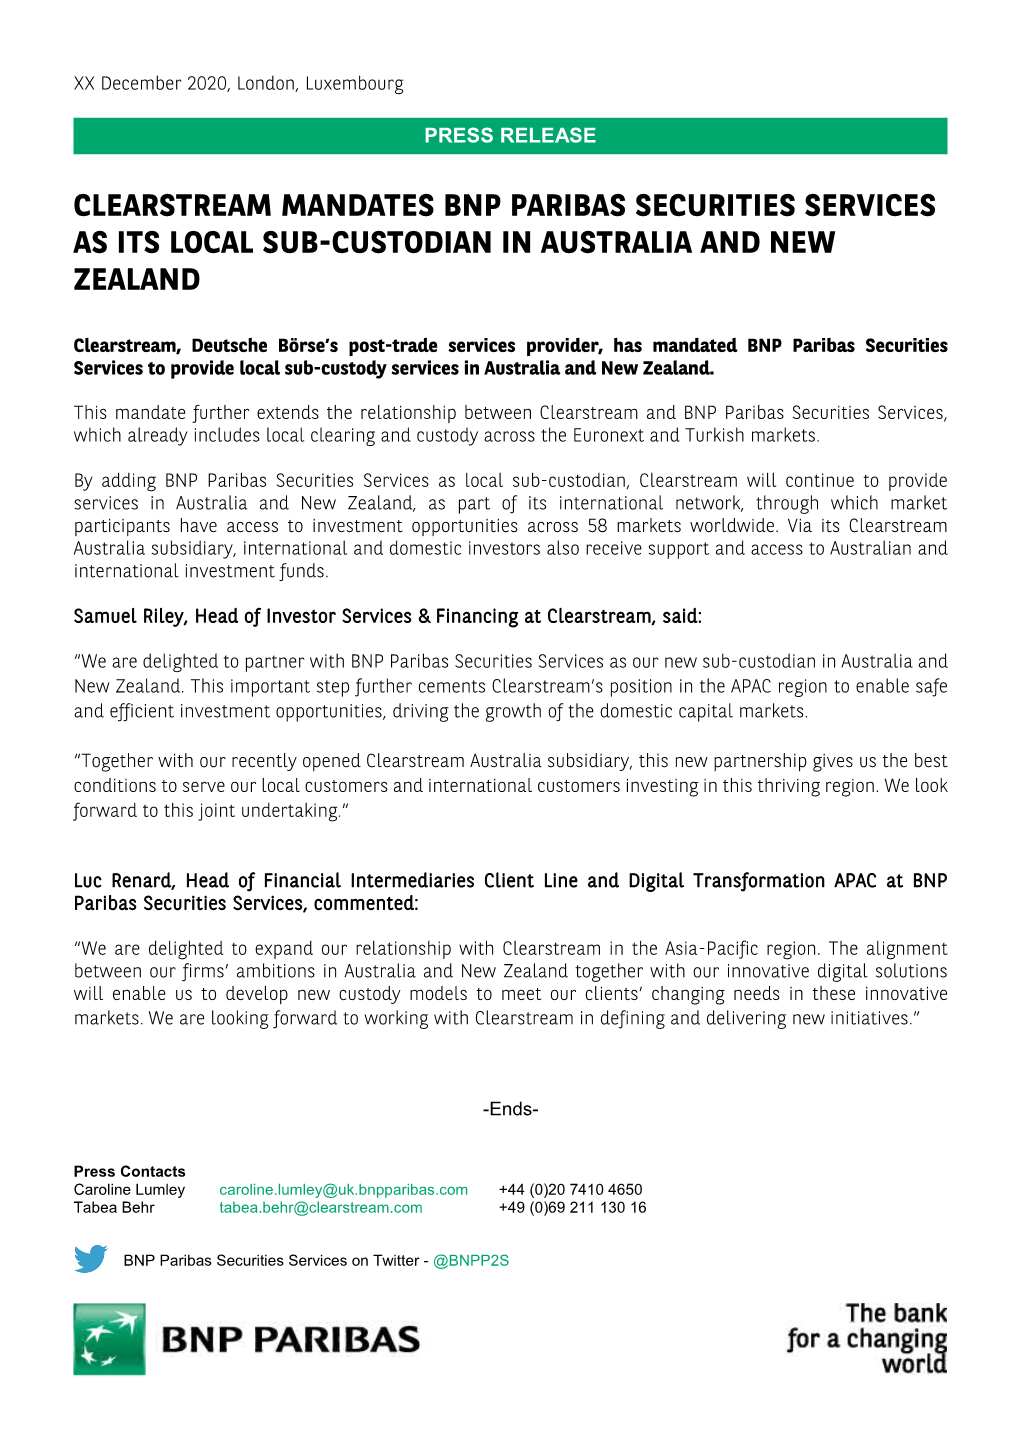 Clearstream Mandates Bnp Paribas Securities Services As Its Local Sub-Custodian in Australia and New Zealand